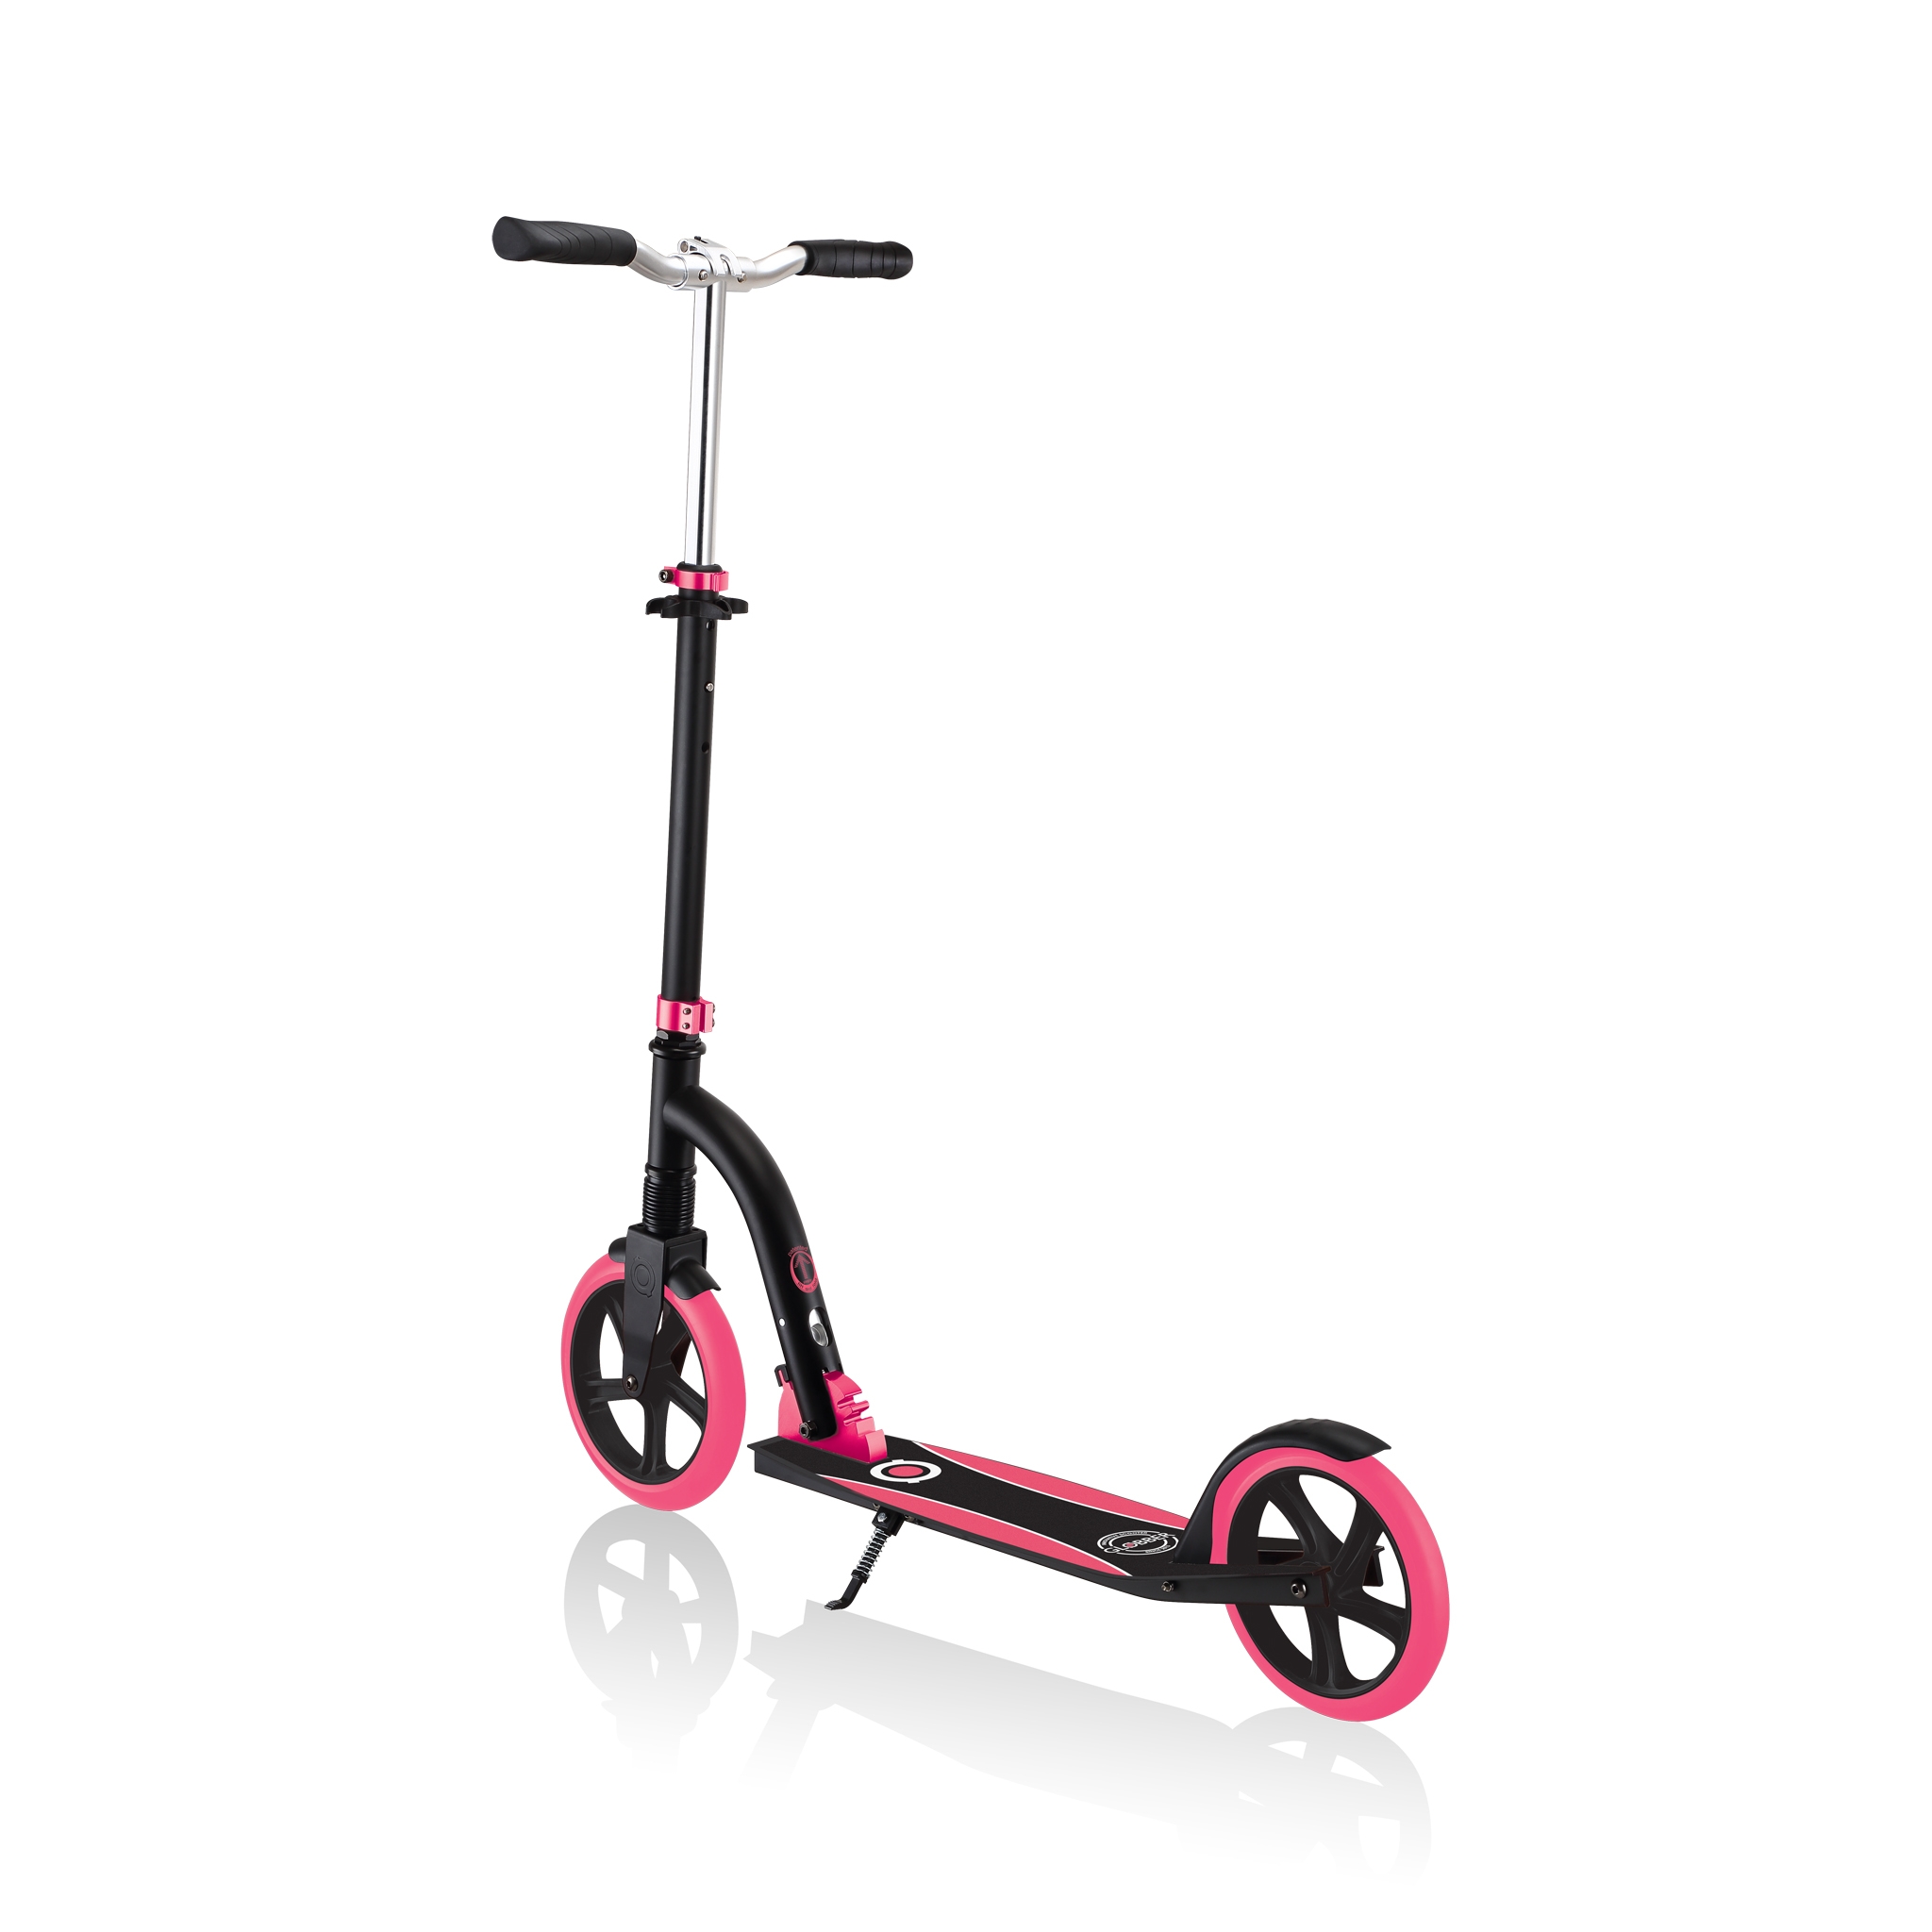 NL-230-205-DUO-big-wheel-scooter-with-front-suspension 9